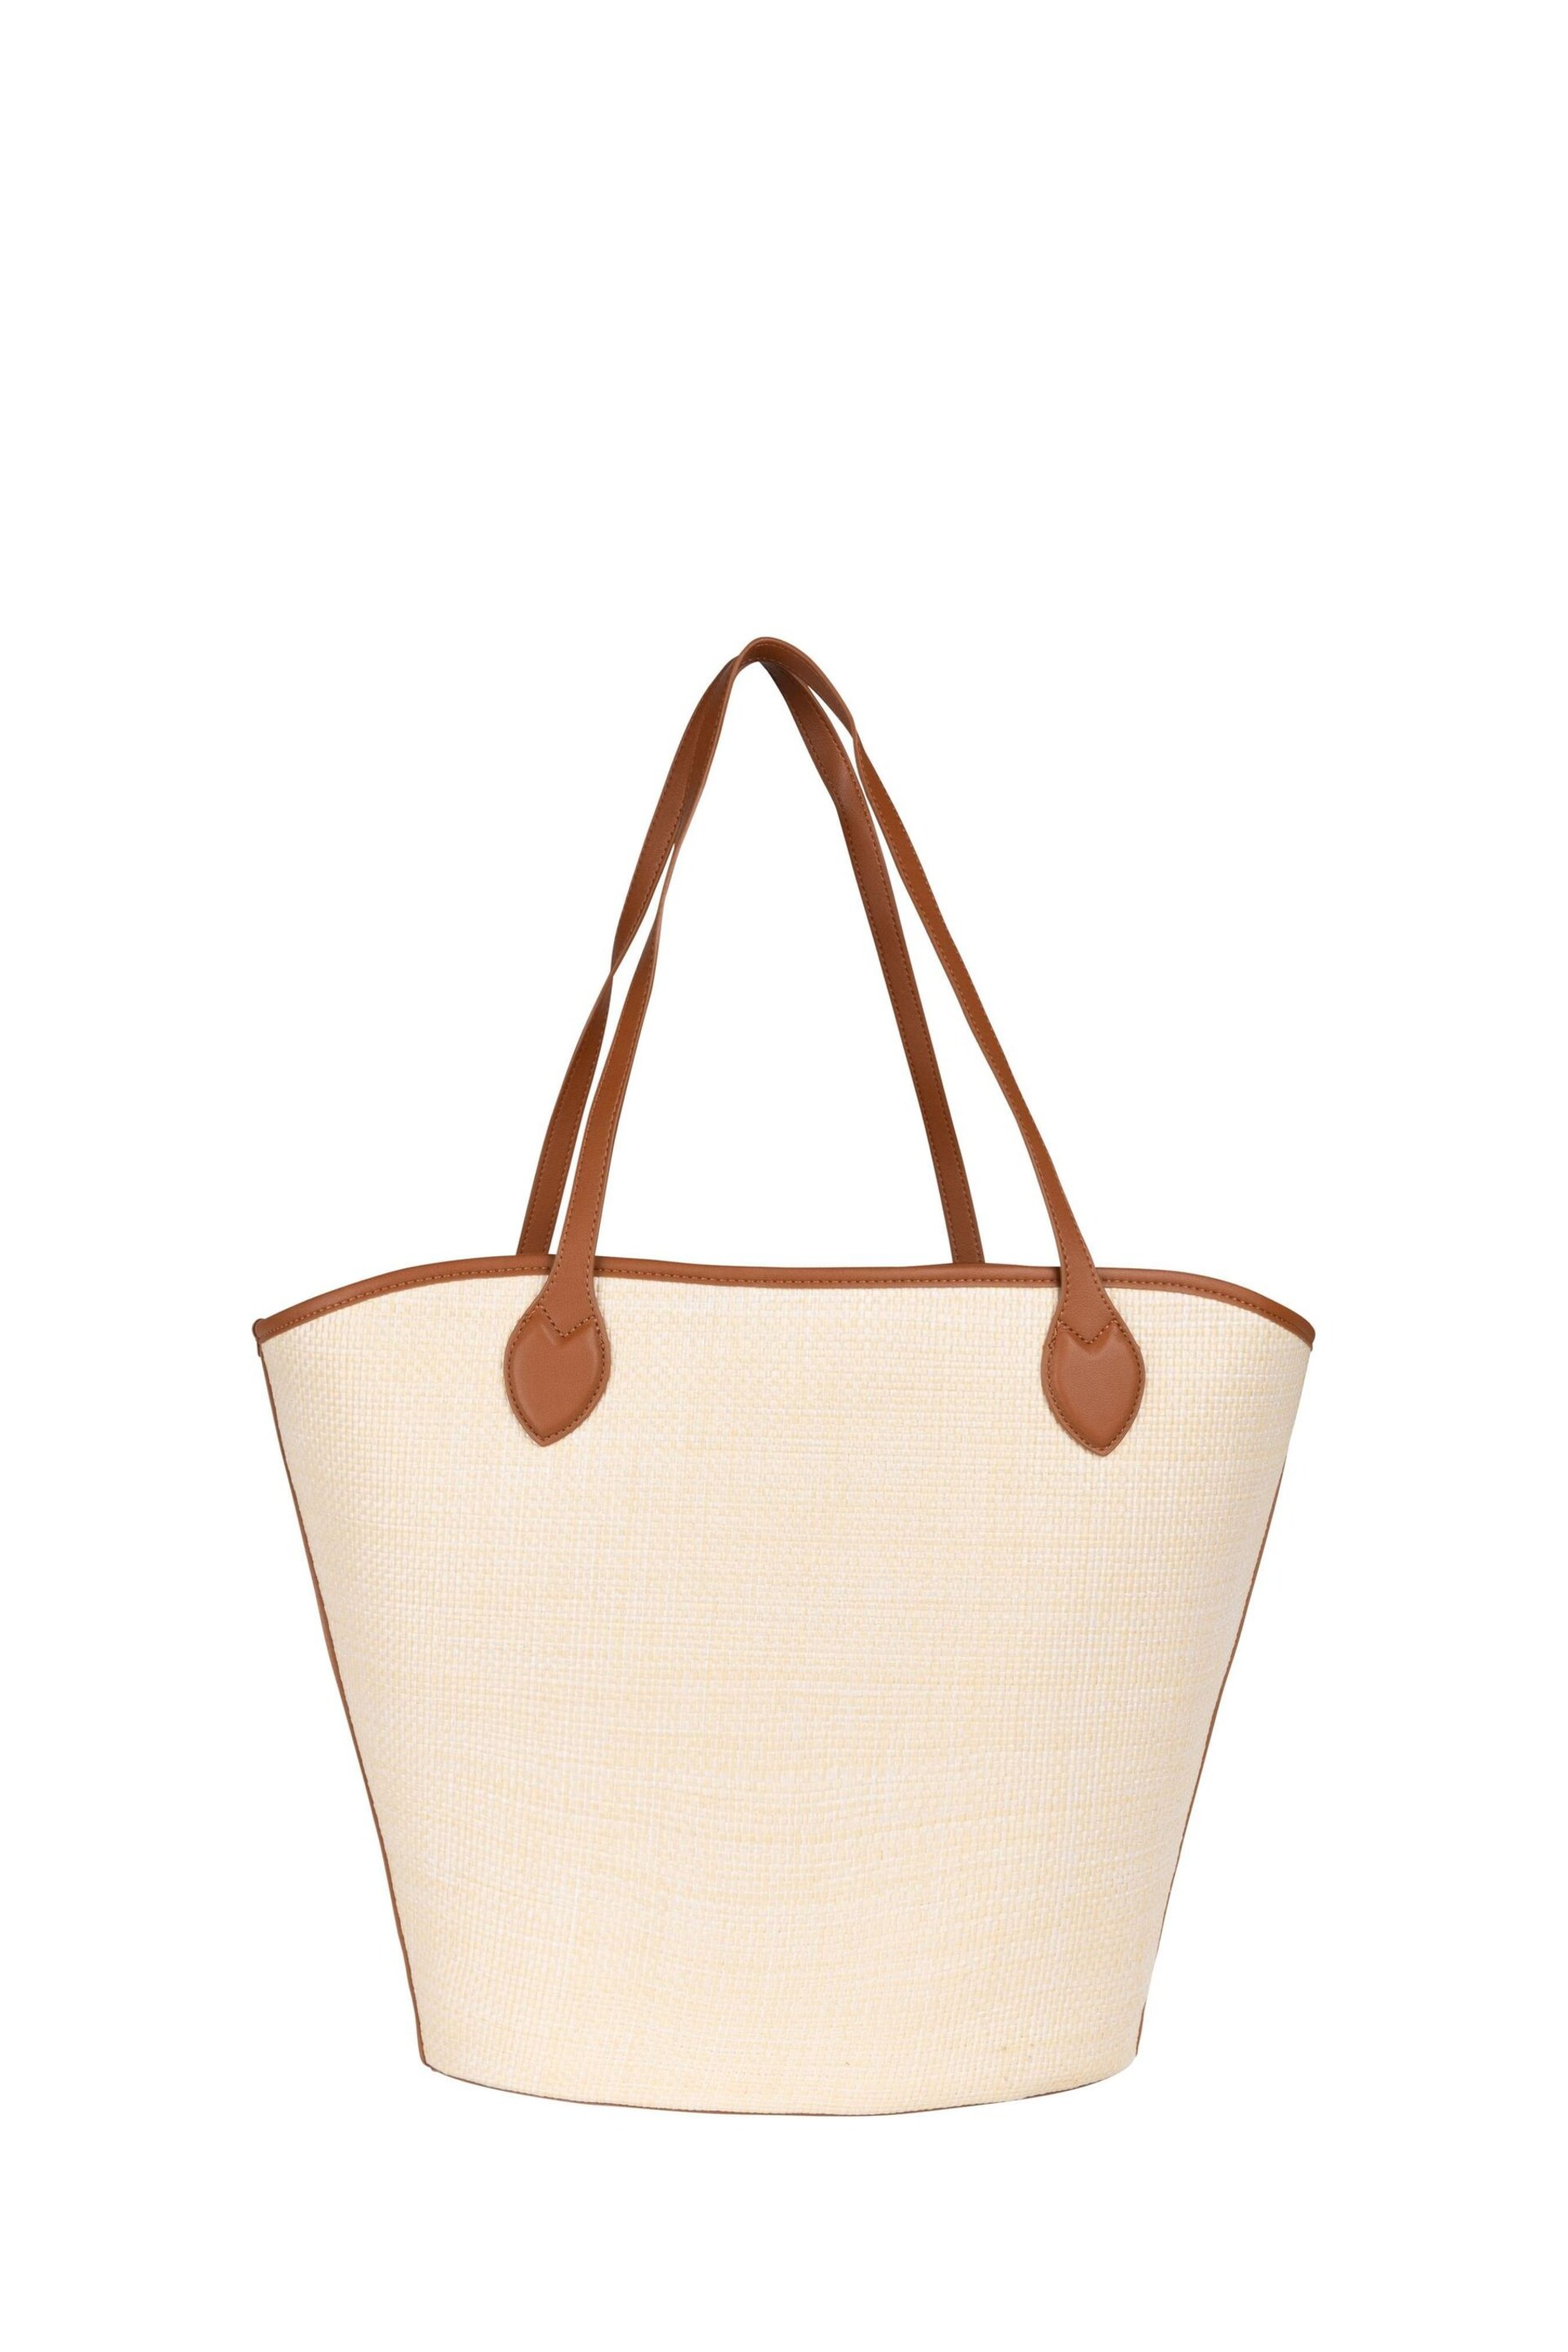 Valentino Bags Brown Covent Canvas Tote Bag With Removable Crossbody Bag - Image 3 of 5